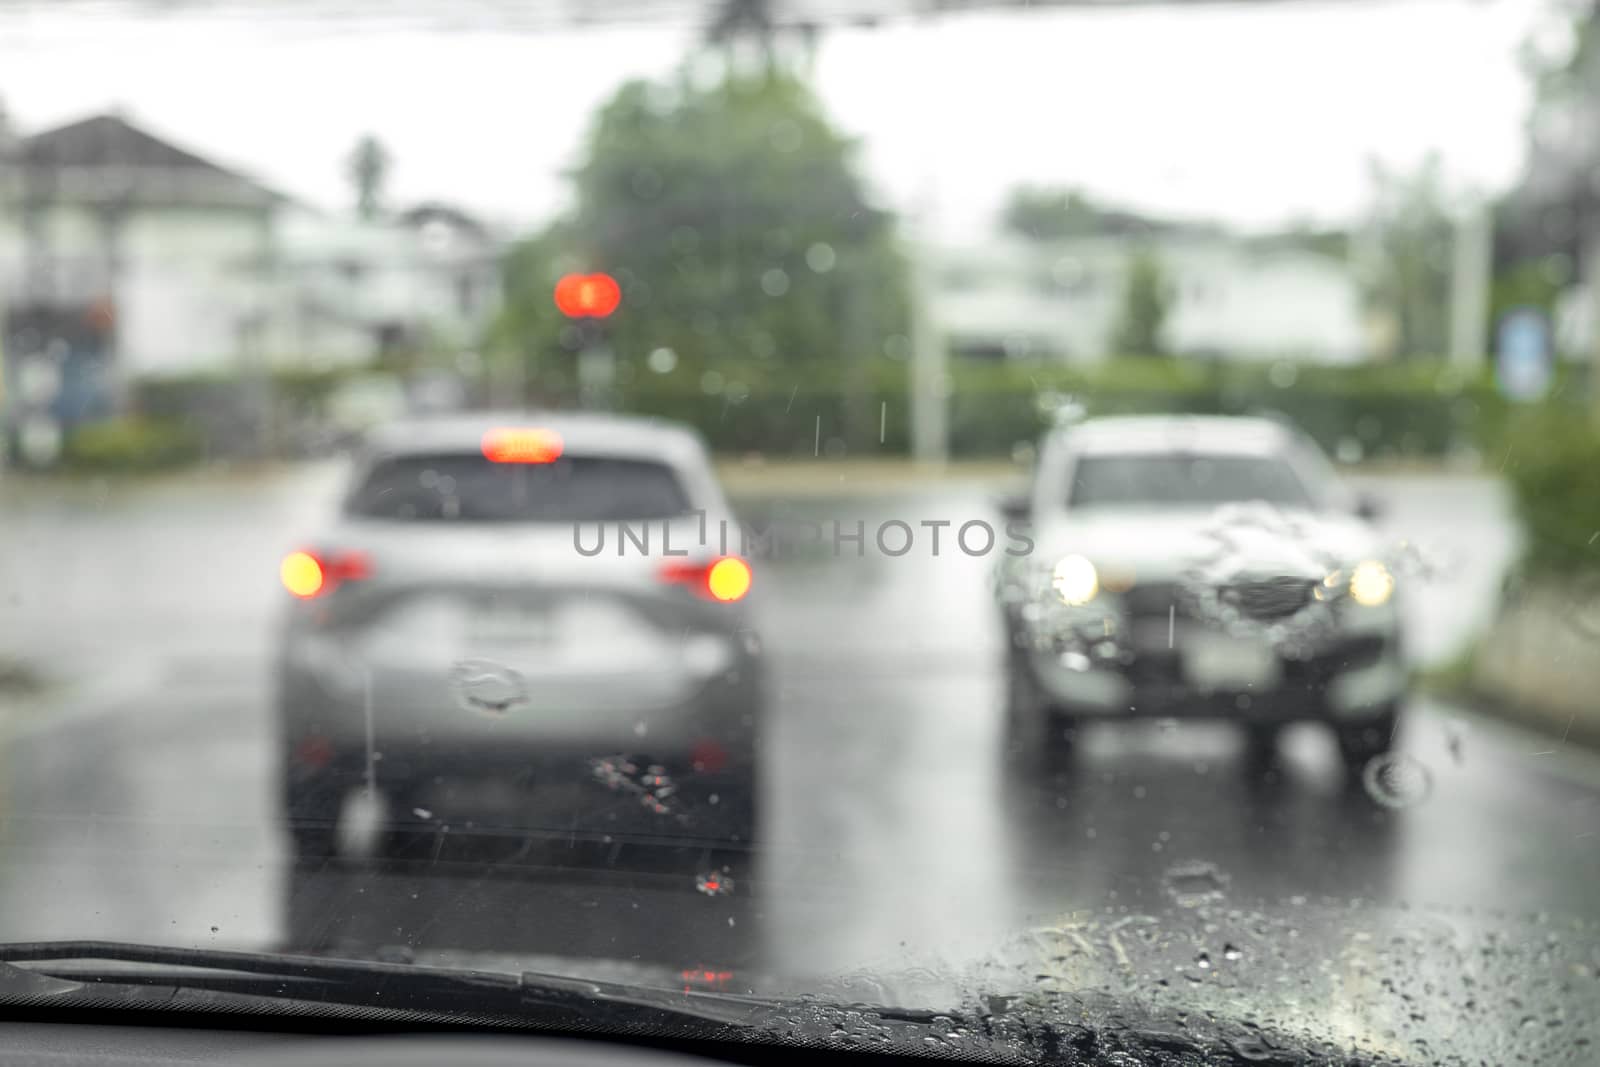 drive a car on the road stop witn trafic light with raindrop over the wind shield. Shot form wind shield